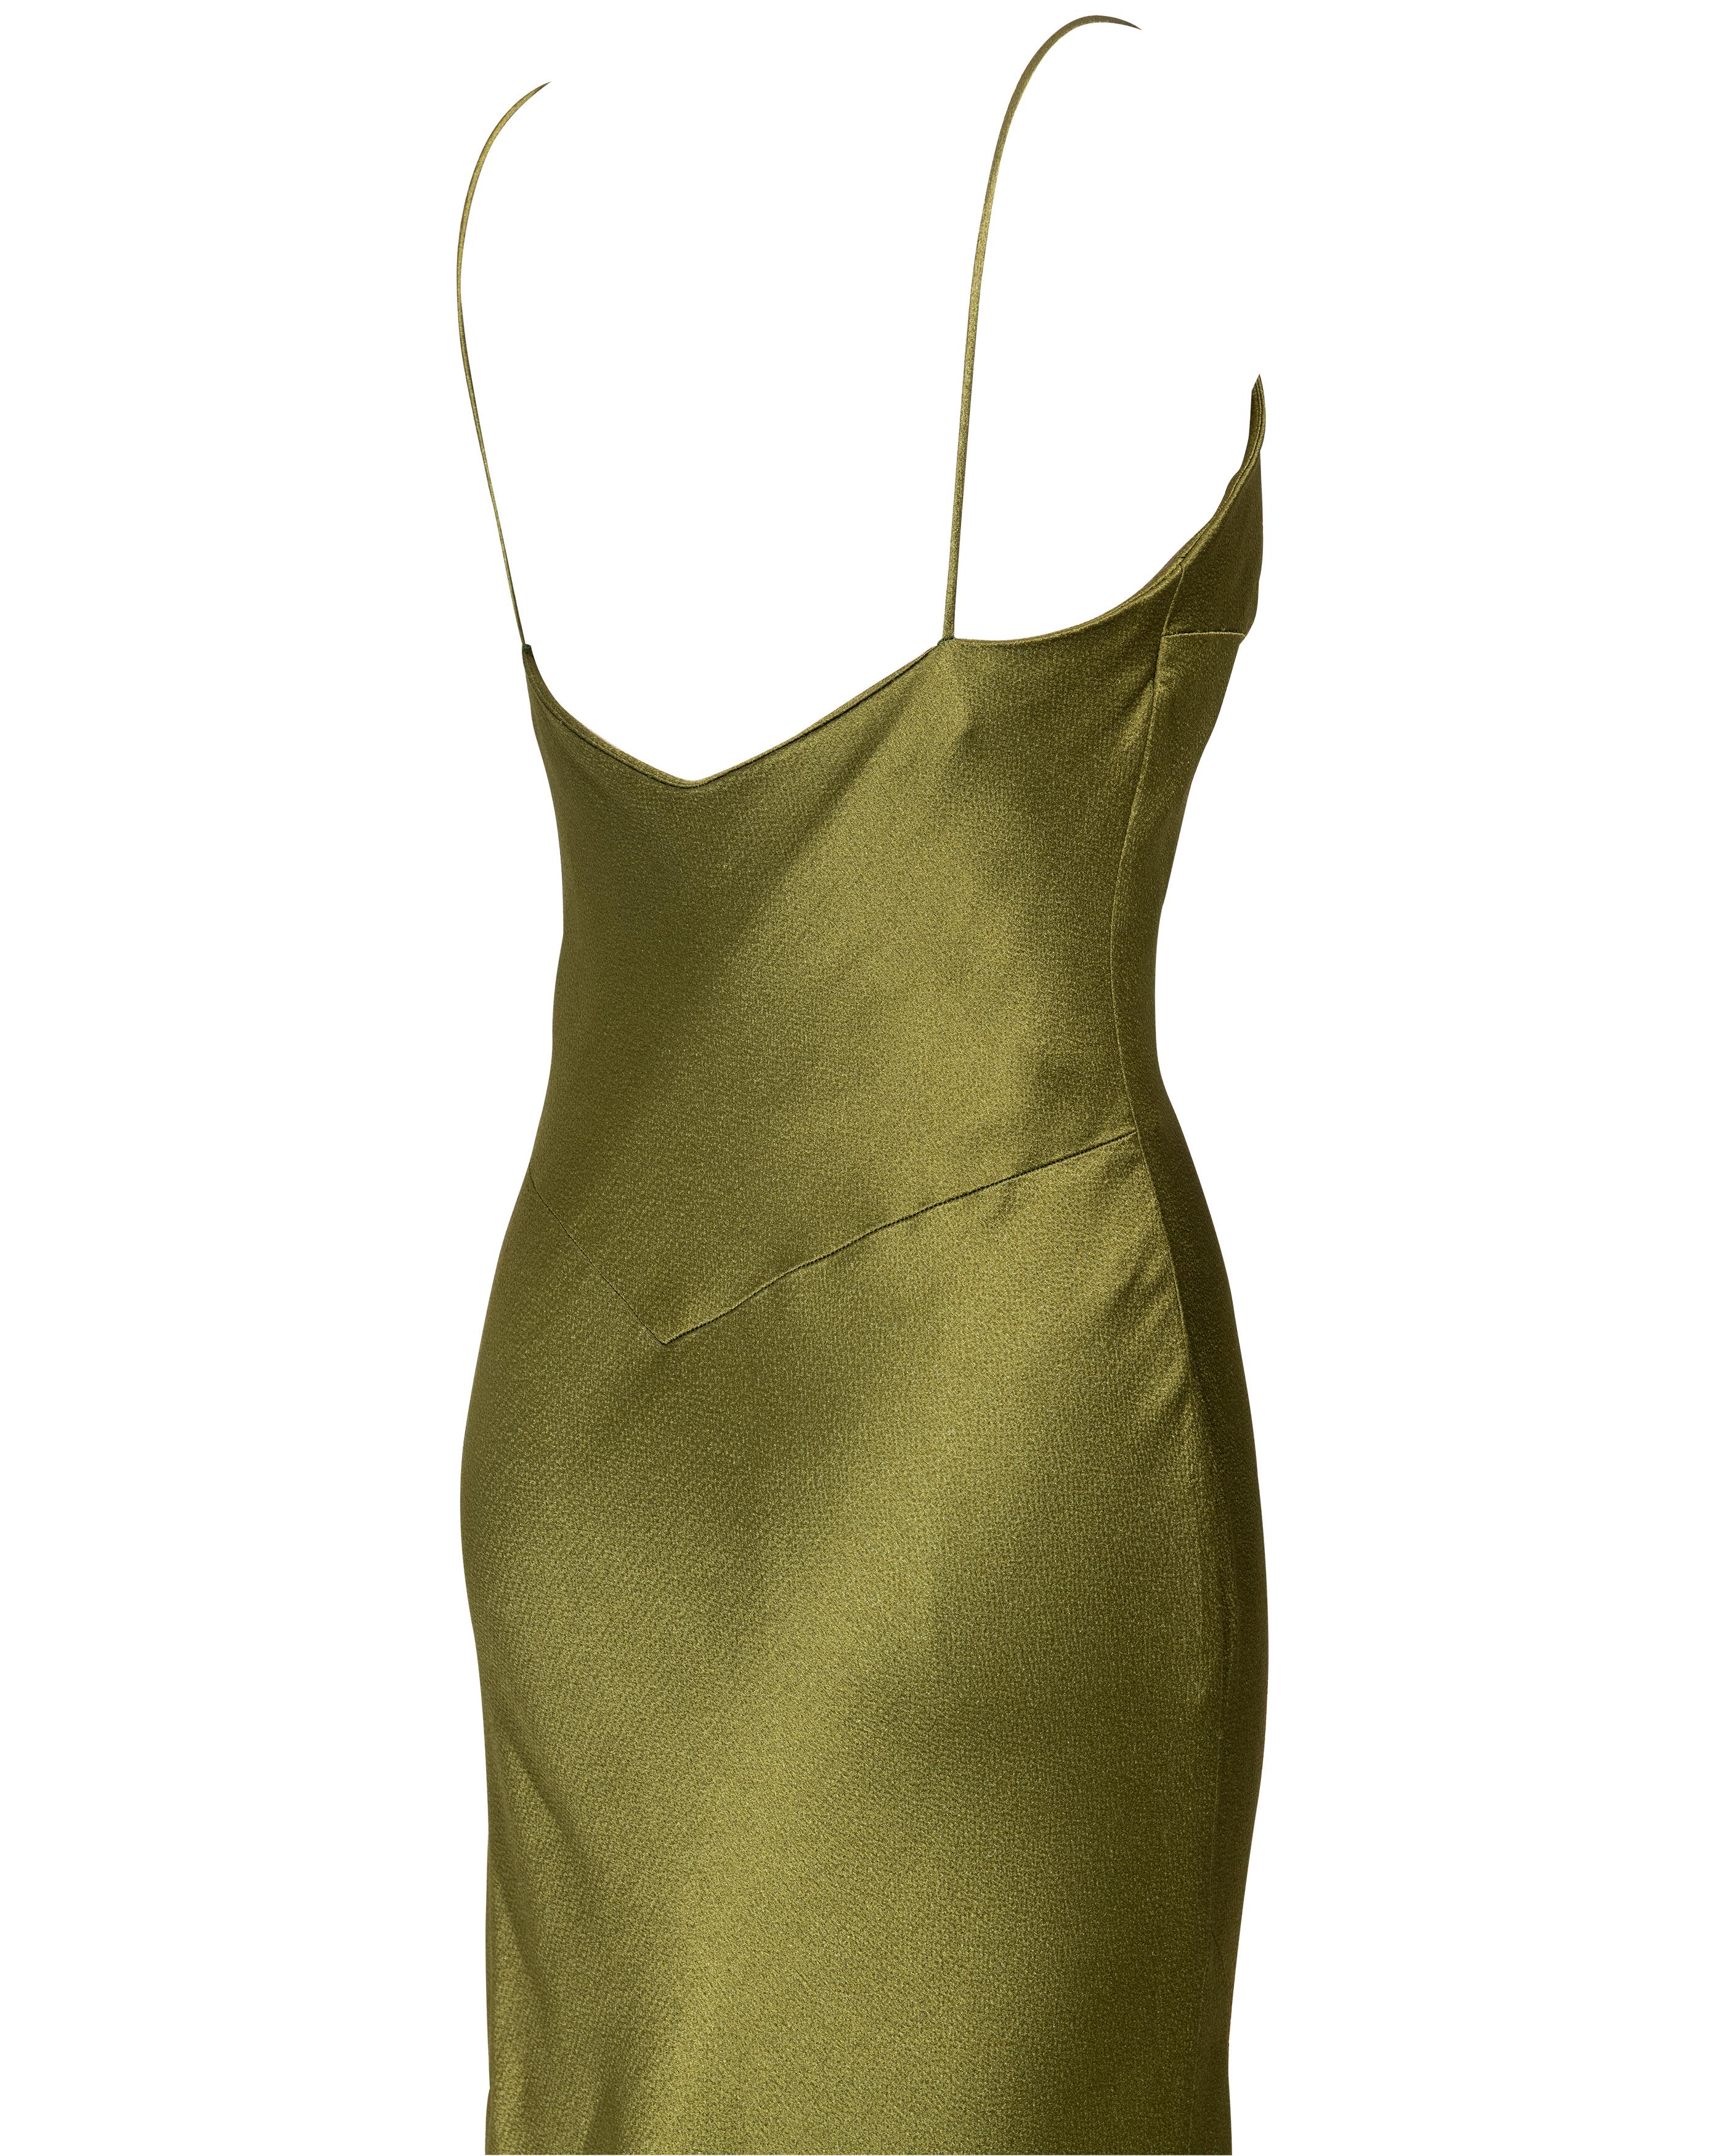 S/S 1999 Christian Dior by John Galliano Olive Green Bias Cut Slip Gown 5